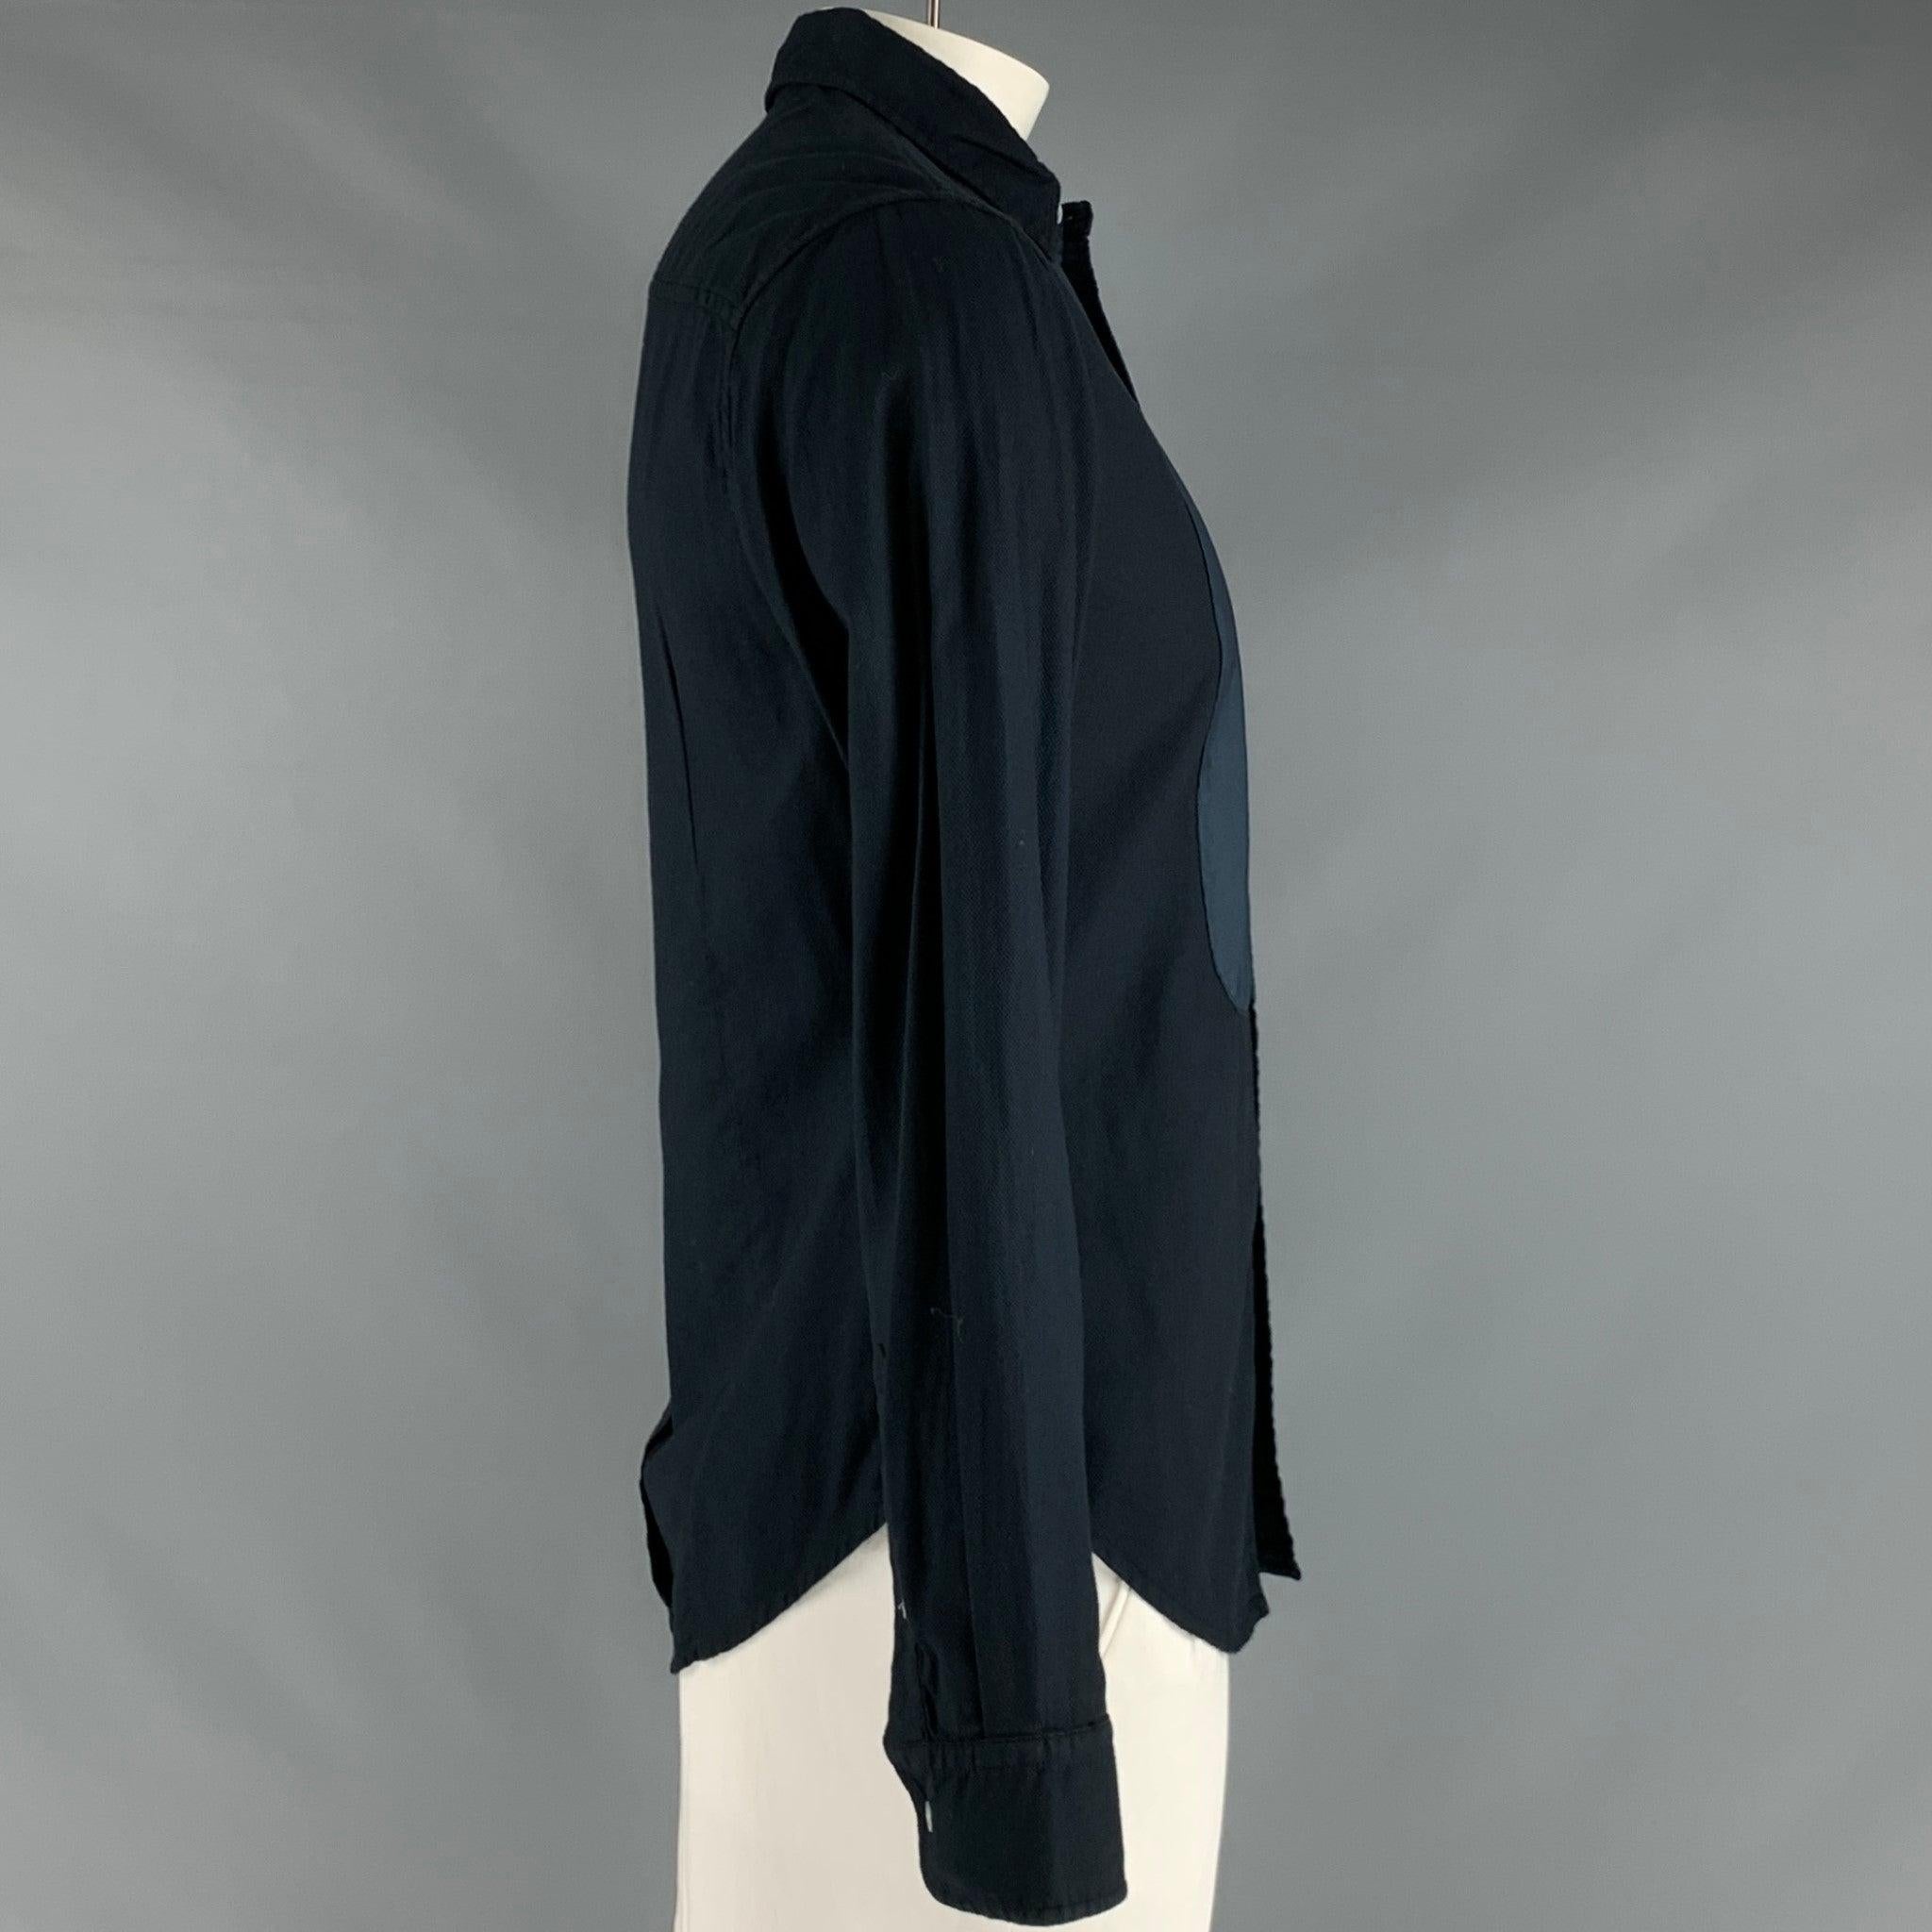 BAND OF OUTSIDERS long sleeve shirt
in a black cotton fabric featuring blue bib front, spread collar, and button closure.Very Good Pre-Owned Condition. Minor signs of wear. 

Marked:   L 

Measurements: 
 
Shoulder: 17.5 inches Chest: 42 inches